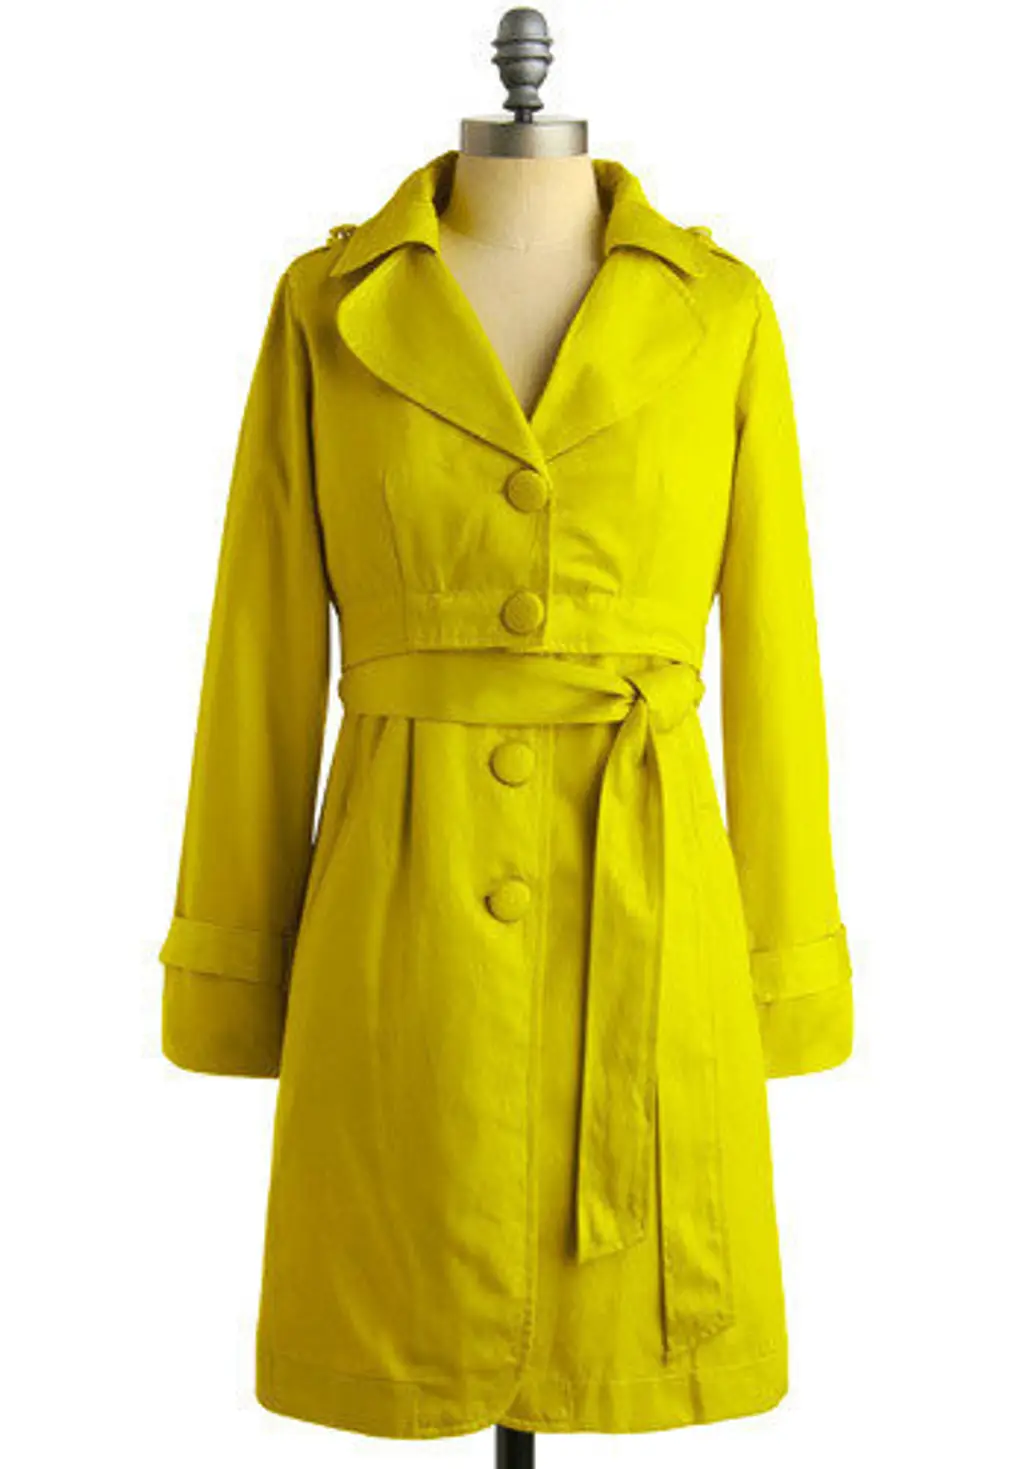 Tell the Chartreuse Coat